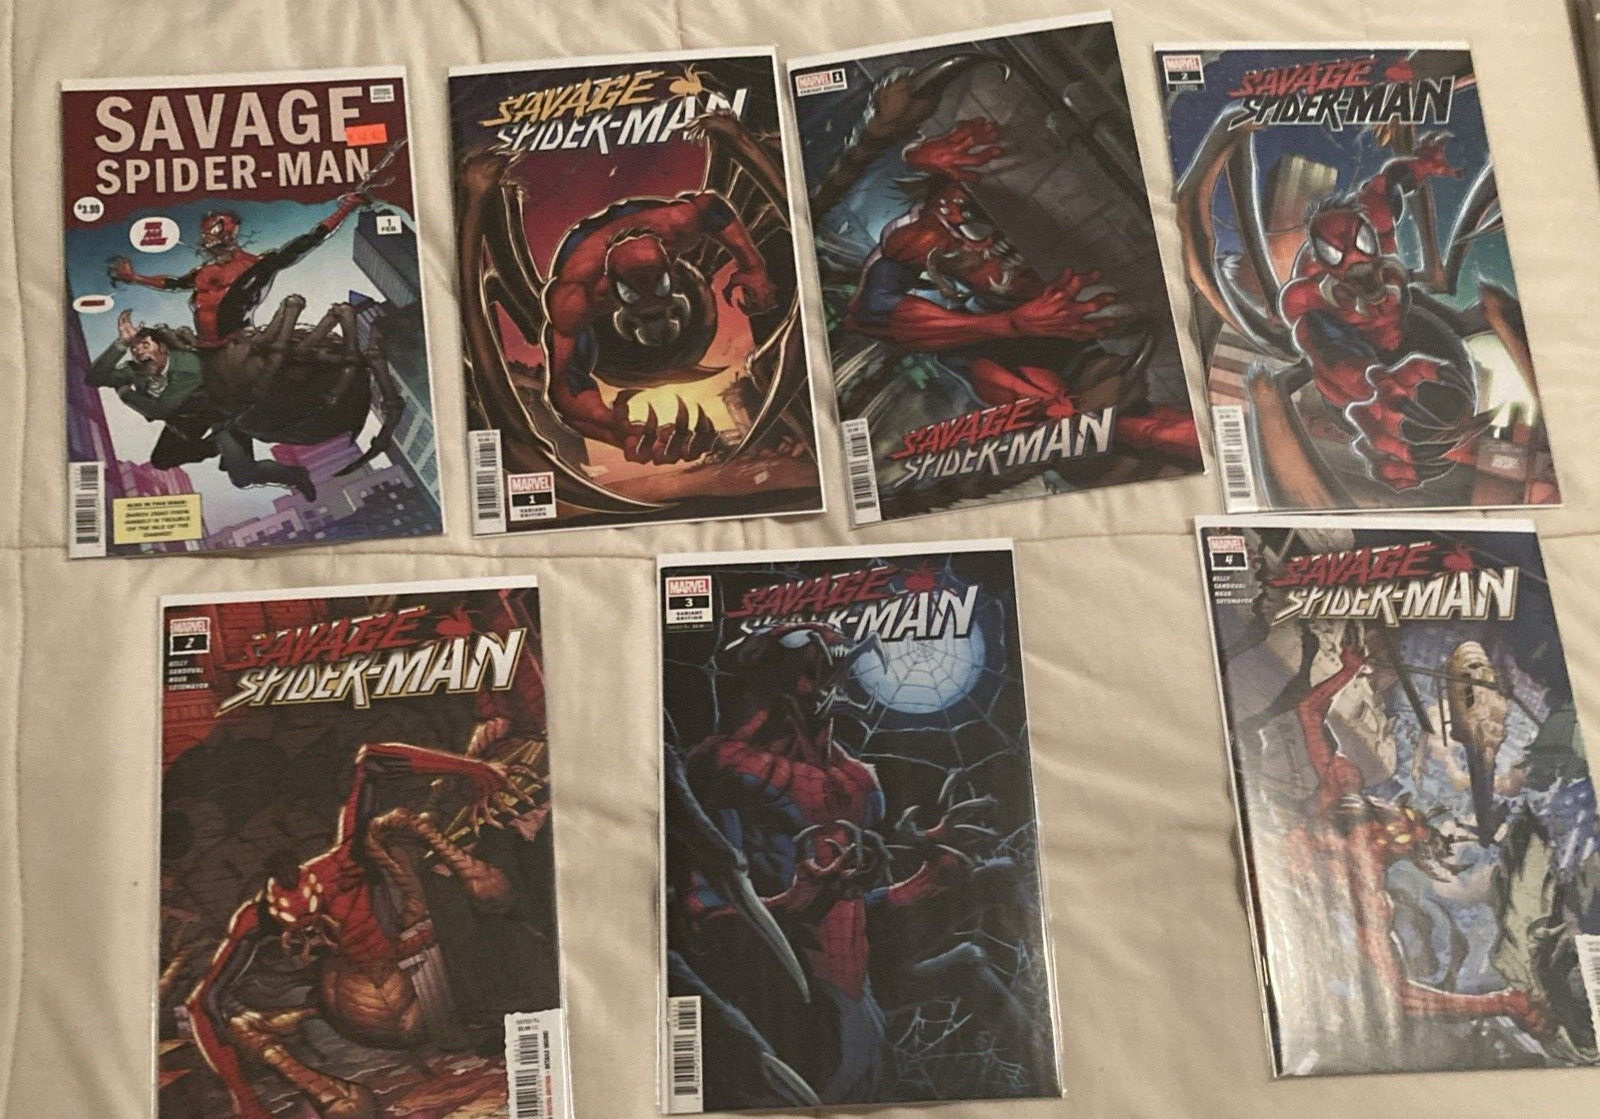 Savage Spider-Man #1-4 Comic Lot with Variants